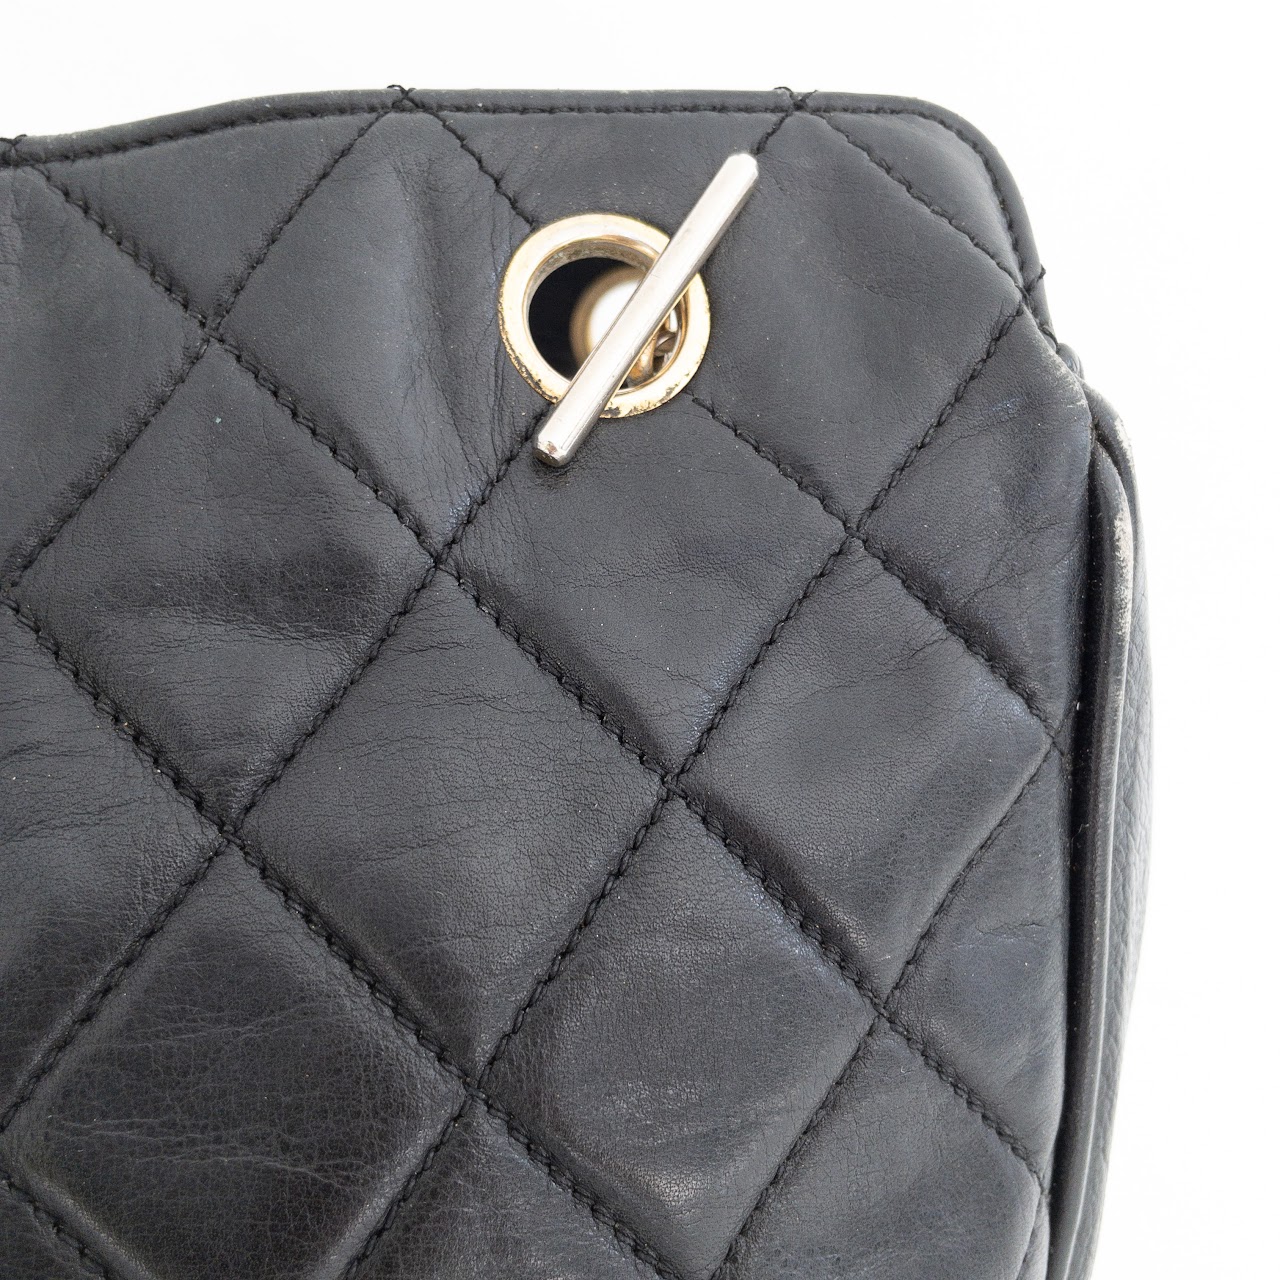 CHANEL BLACK TEXTURED Quilted Medium Single Flap Gold CC Shoulder